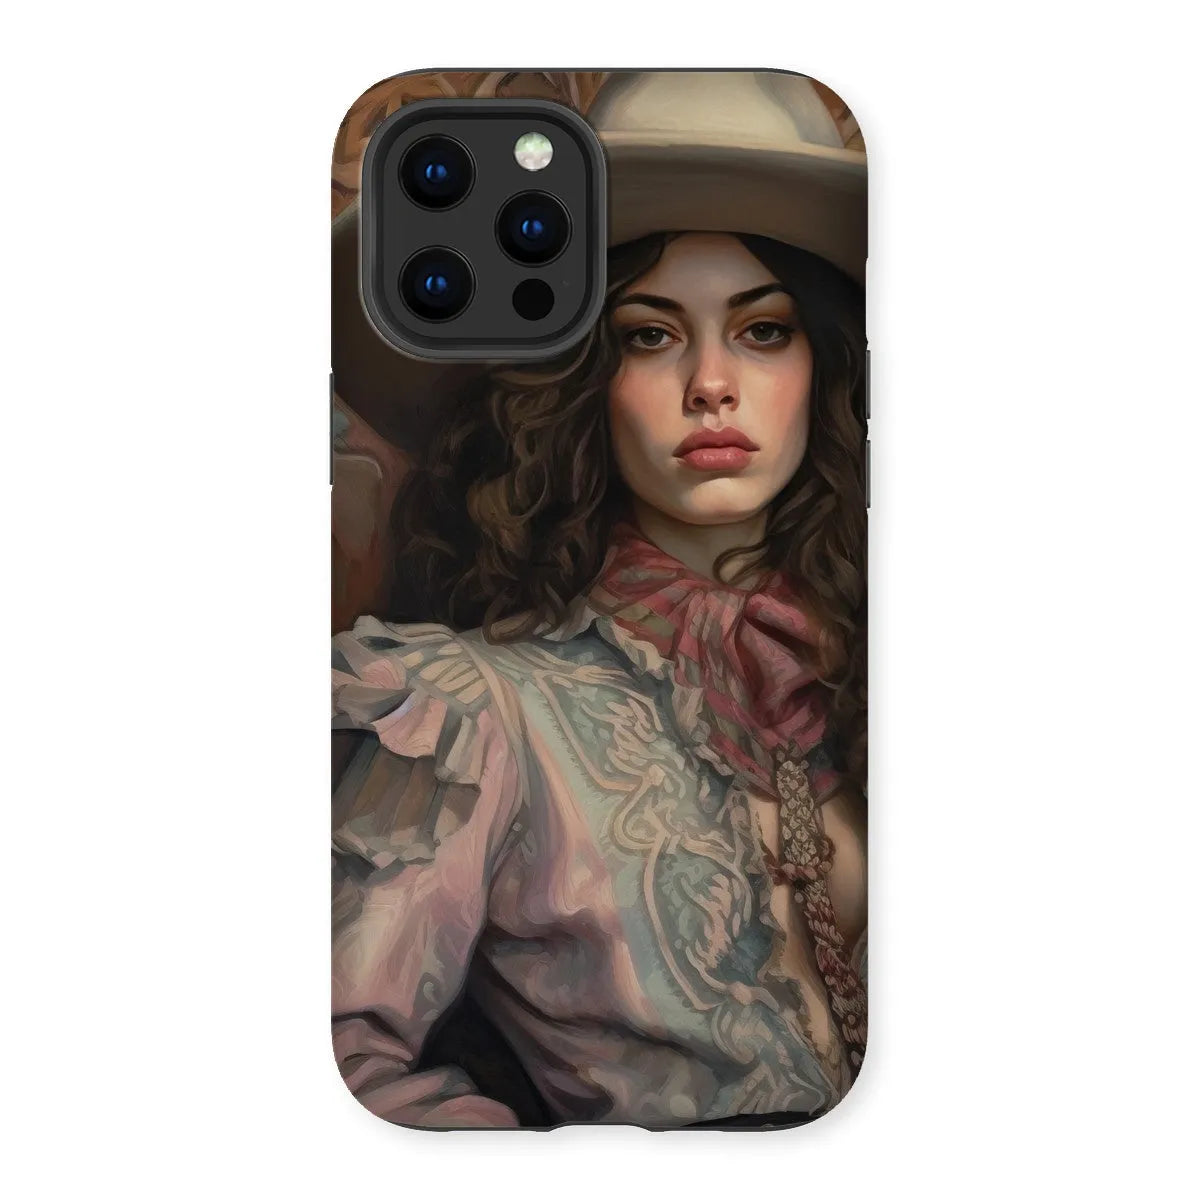 Alex The Lesbian Cowgirl - Sapphic Art Phone Case - Iphone 13 Pro Max / Matte - Mobile Phone Cases - Aesthetic Art